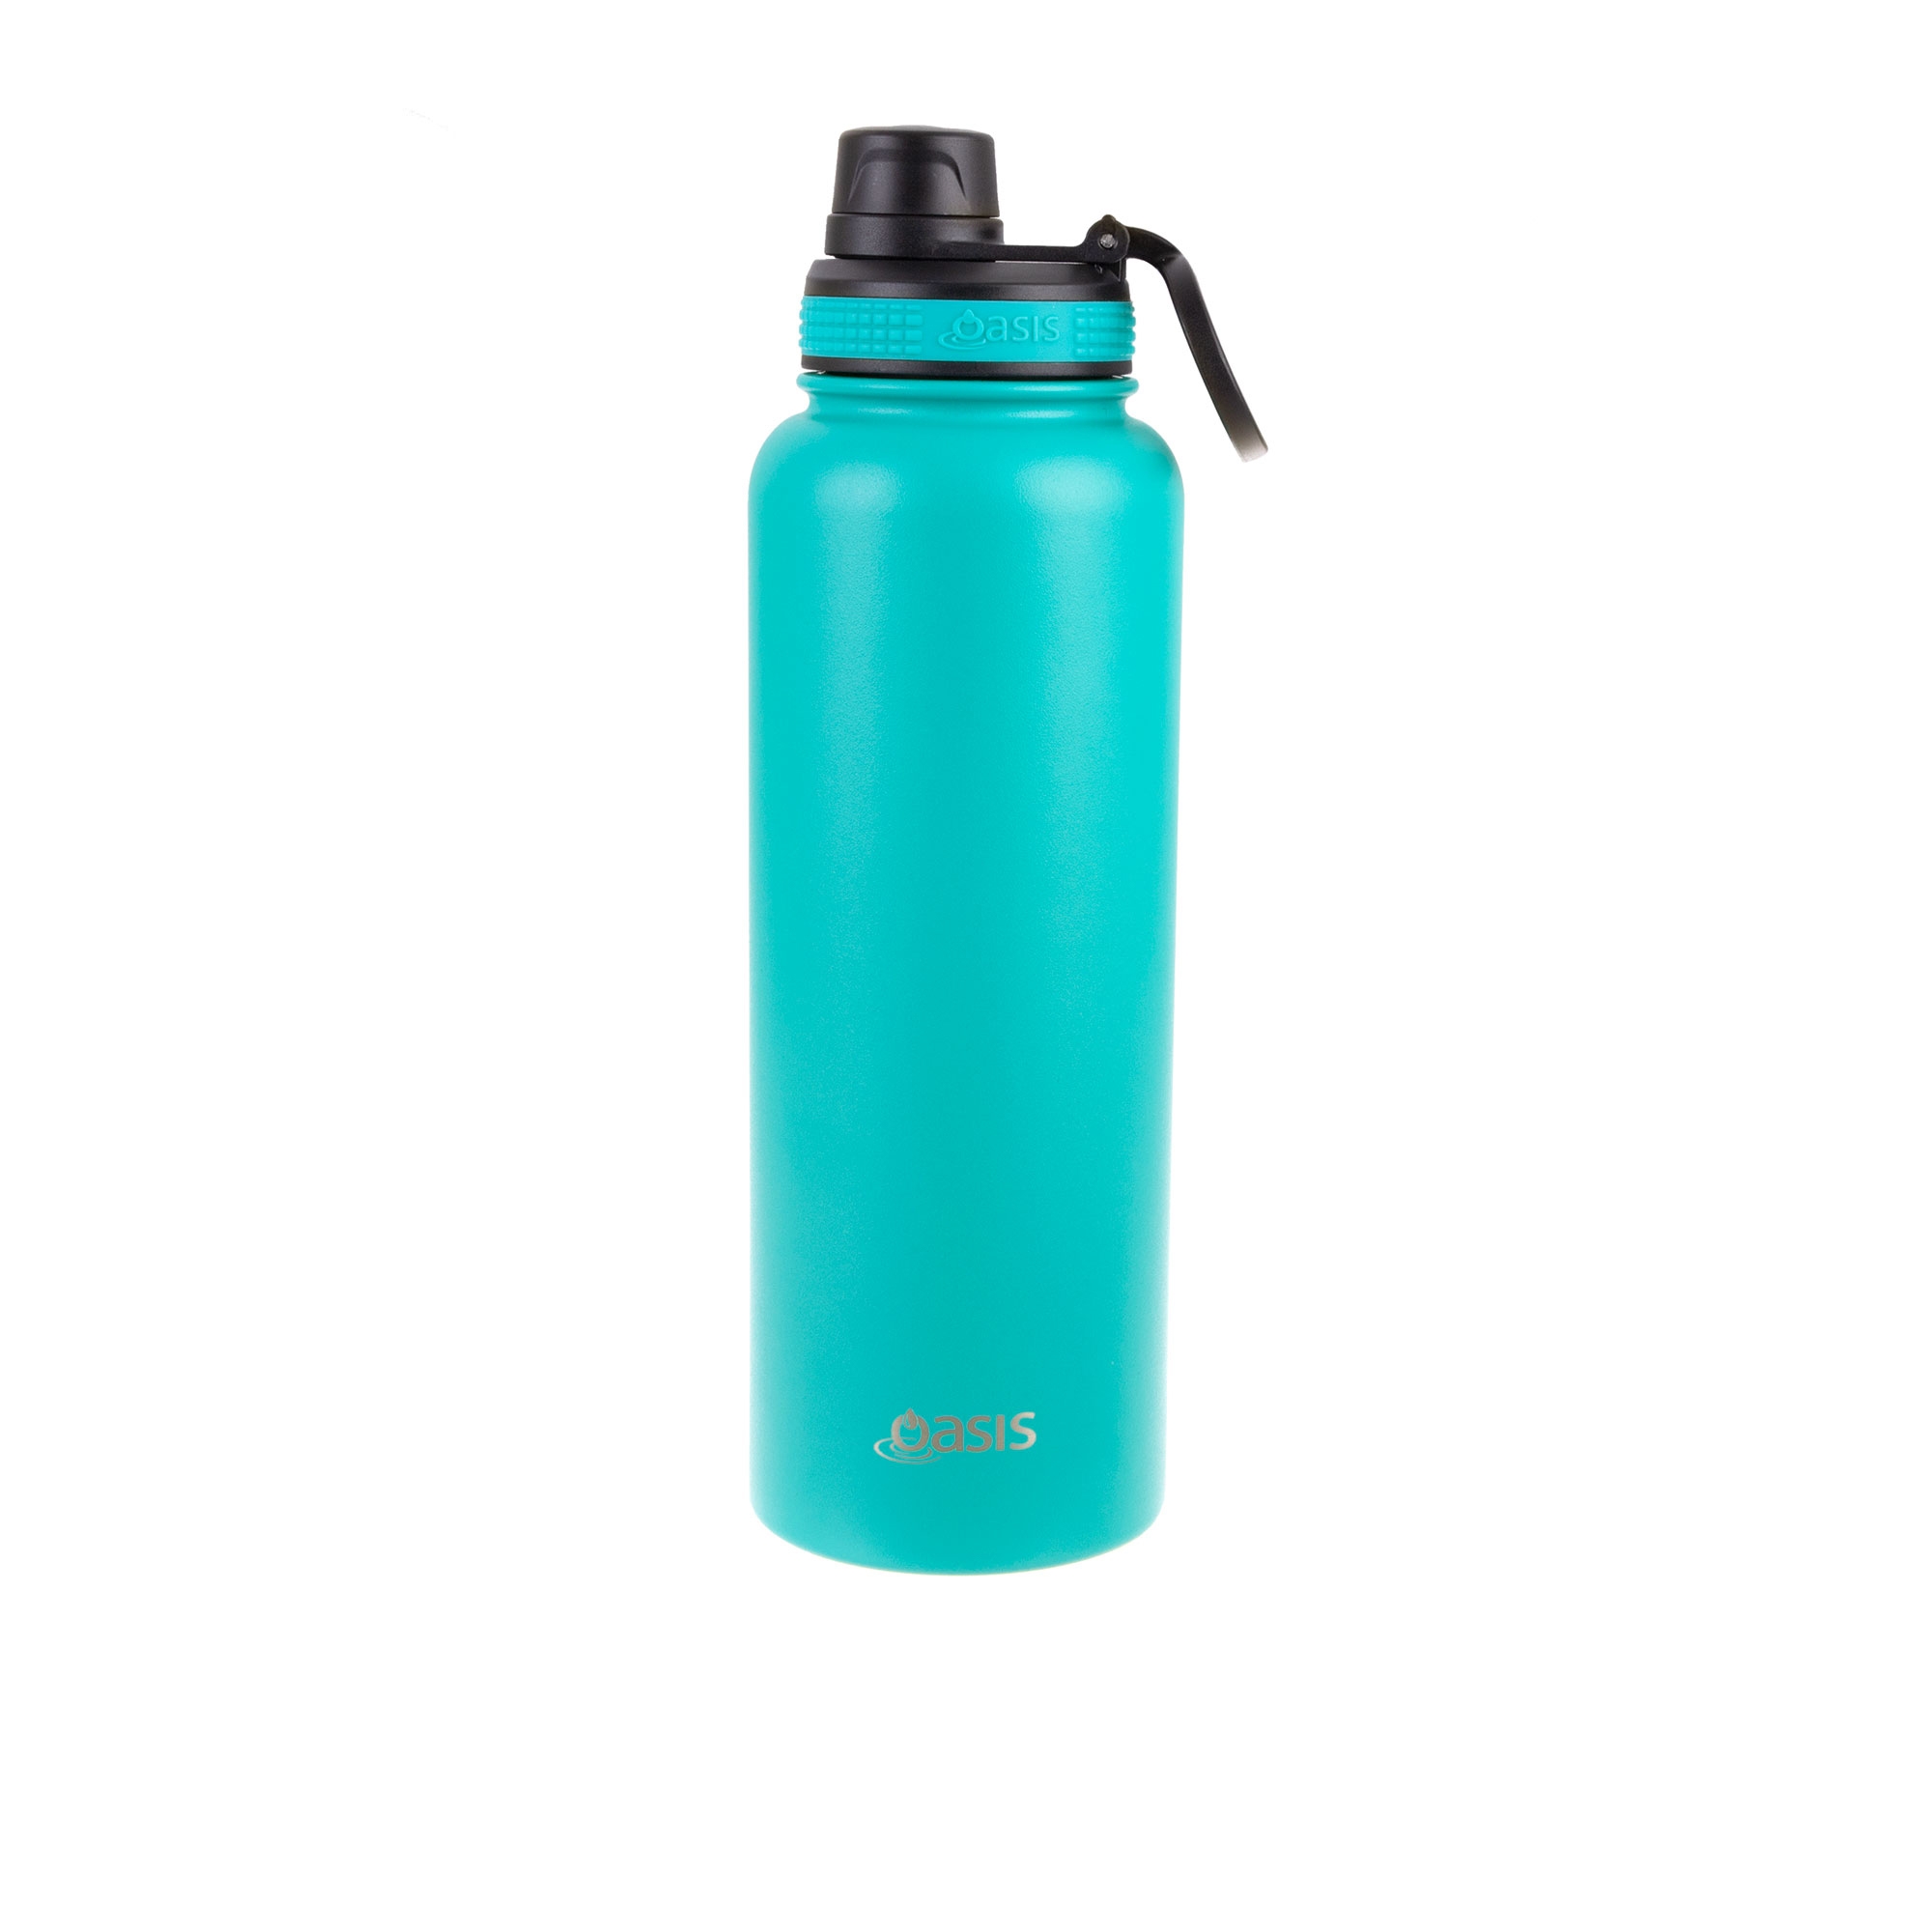 Oasis Challenger Double Wall Insulated Sports Bottle 1.1L Turquoise Image 1